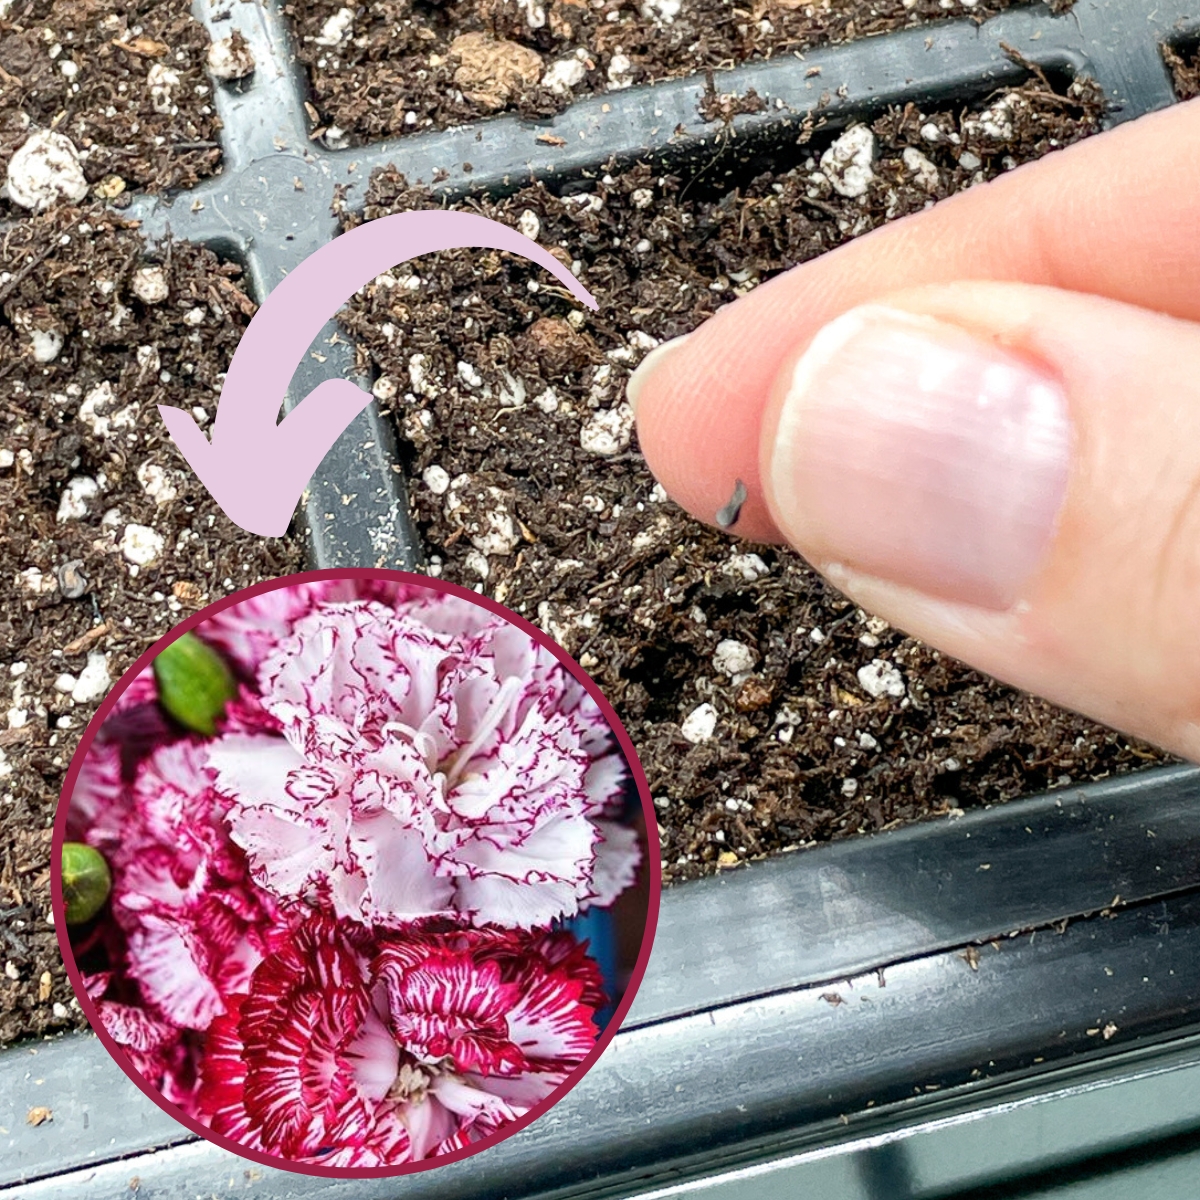 Carnation - varieties, planting, sowing and advice on caring for it